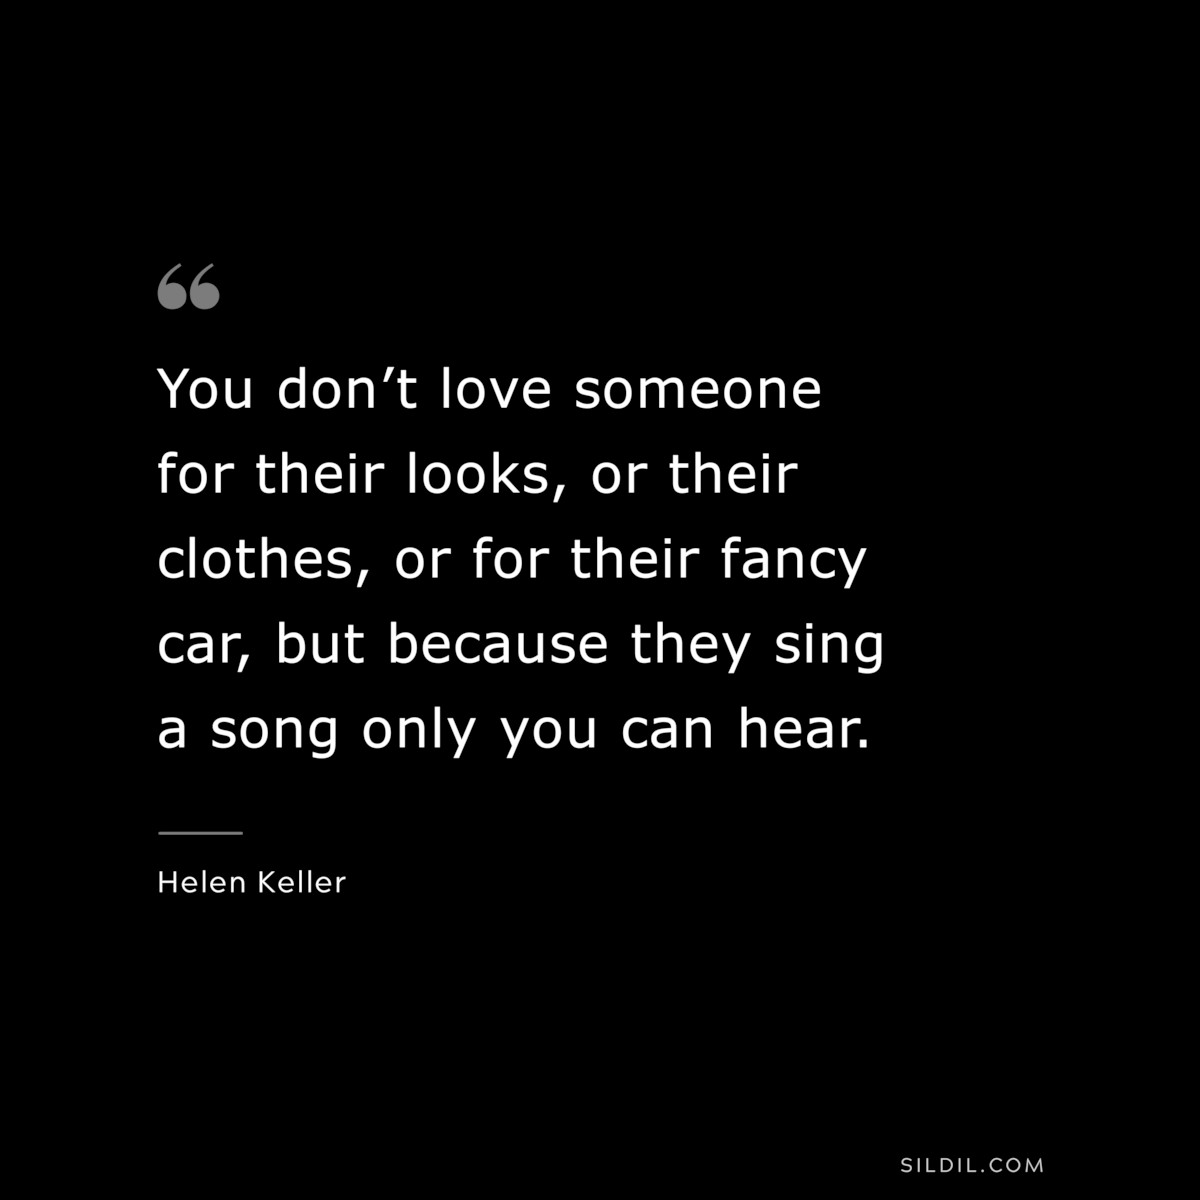 You don’t love someone for their looks, or their clothes, or for their fancy car, but because they sing a song only you can hear. ― Helen Keller